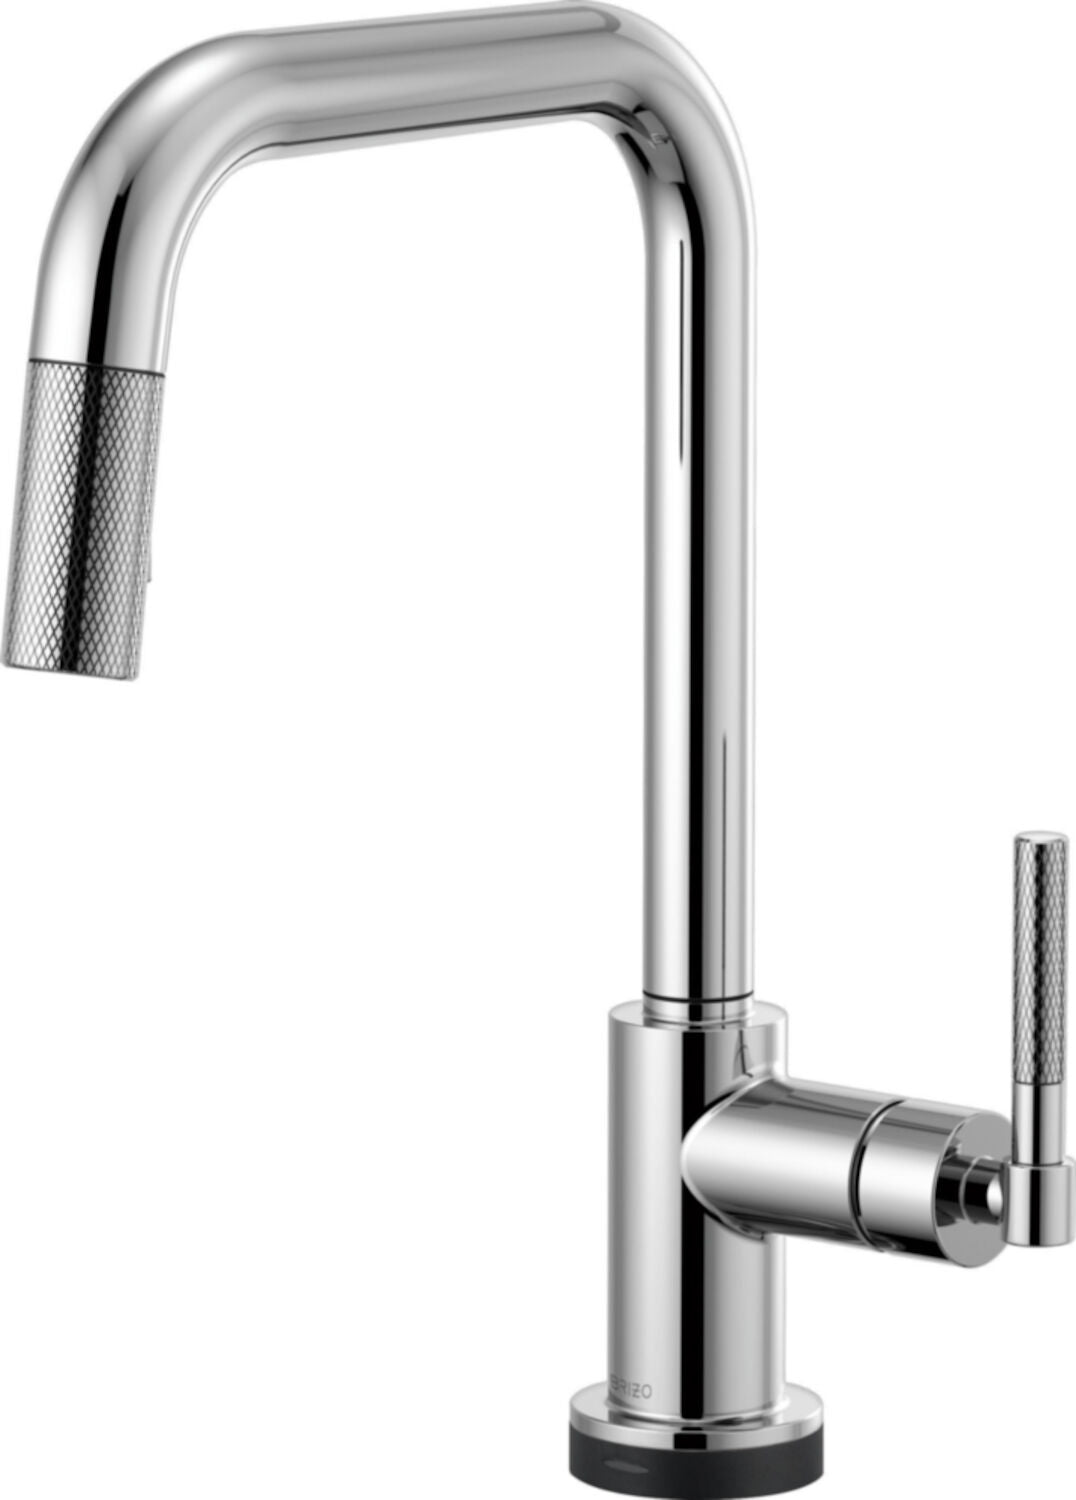 LITZE SMARTTOUCH® PULL-DOWN FAUCET WITH SQUARE SPOUT AND KNURLED HANDLE